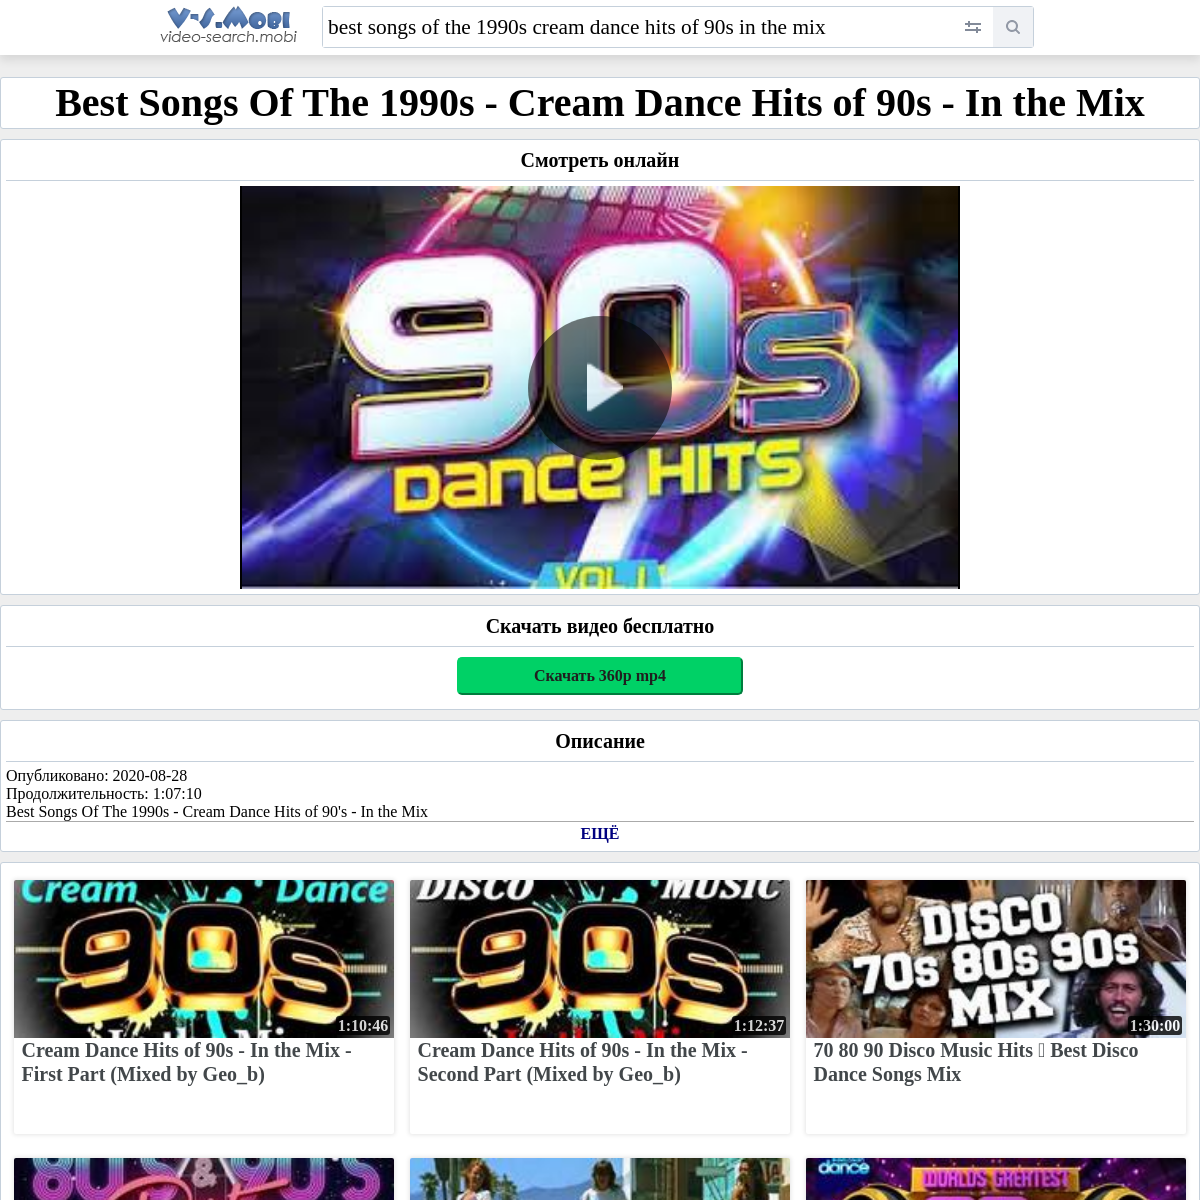 A complete backup of https://v-s.mobi/best-songs-of-the-1990s-cream-dance-hits-of-90s-in-the-mix-1:10:26